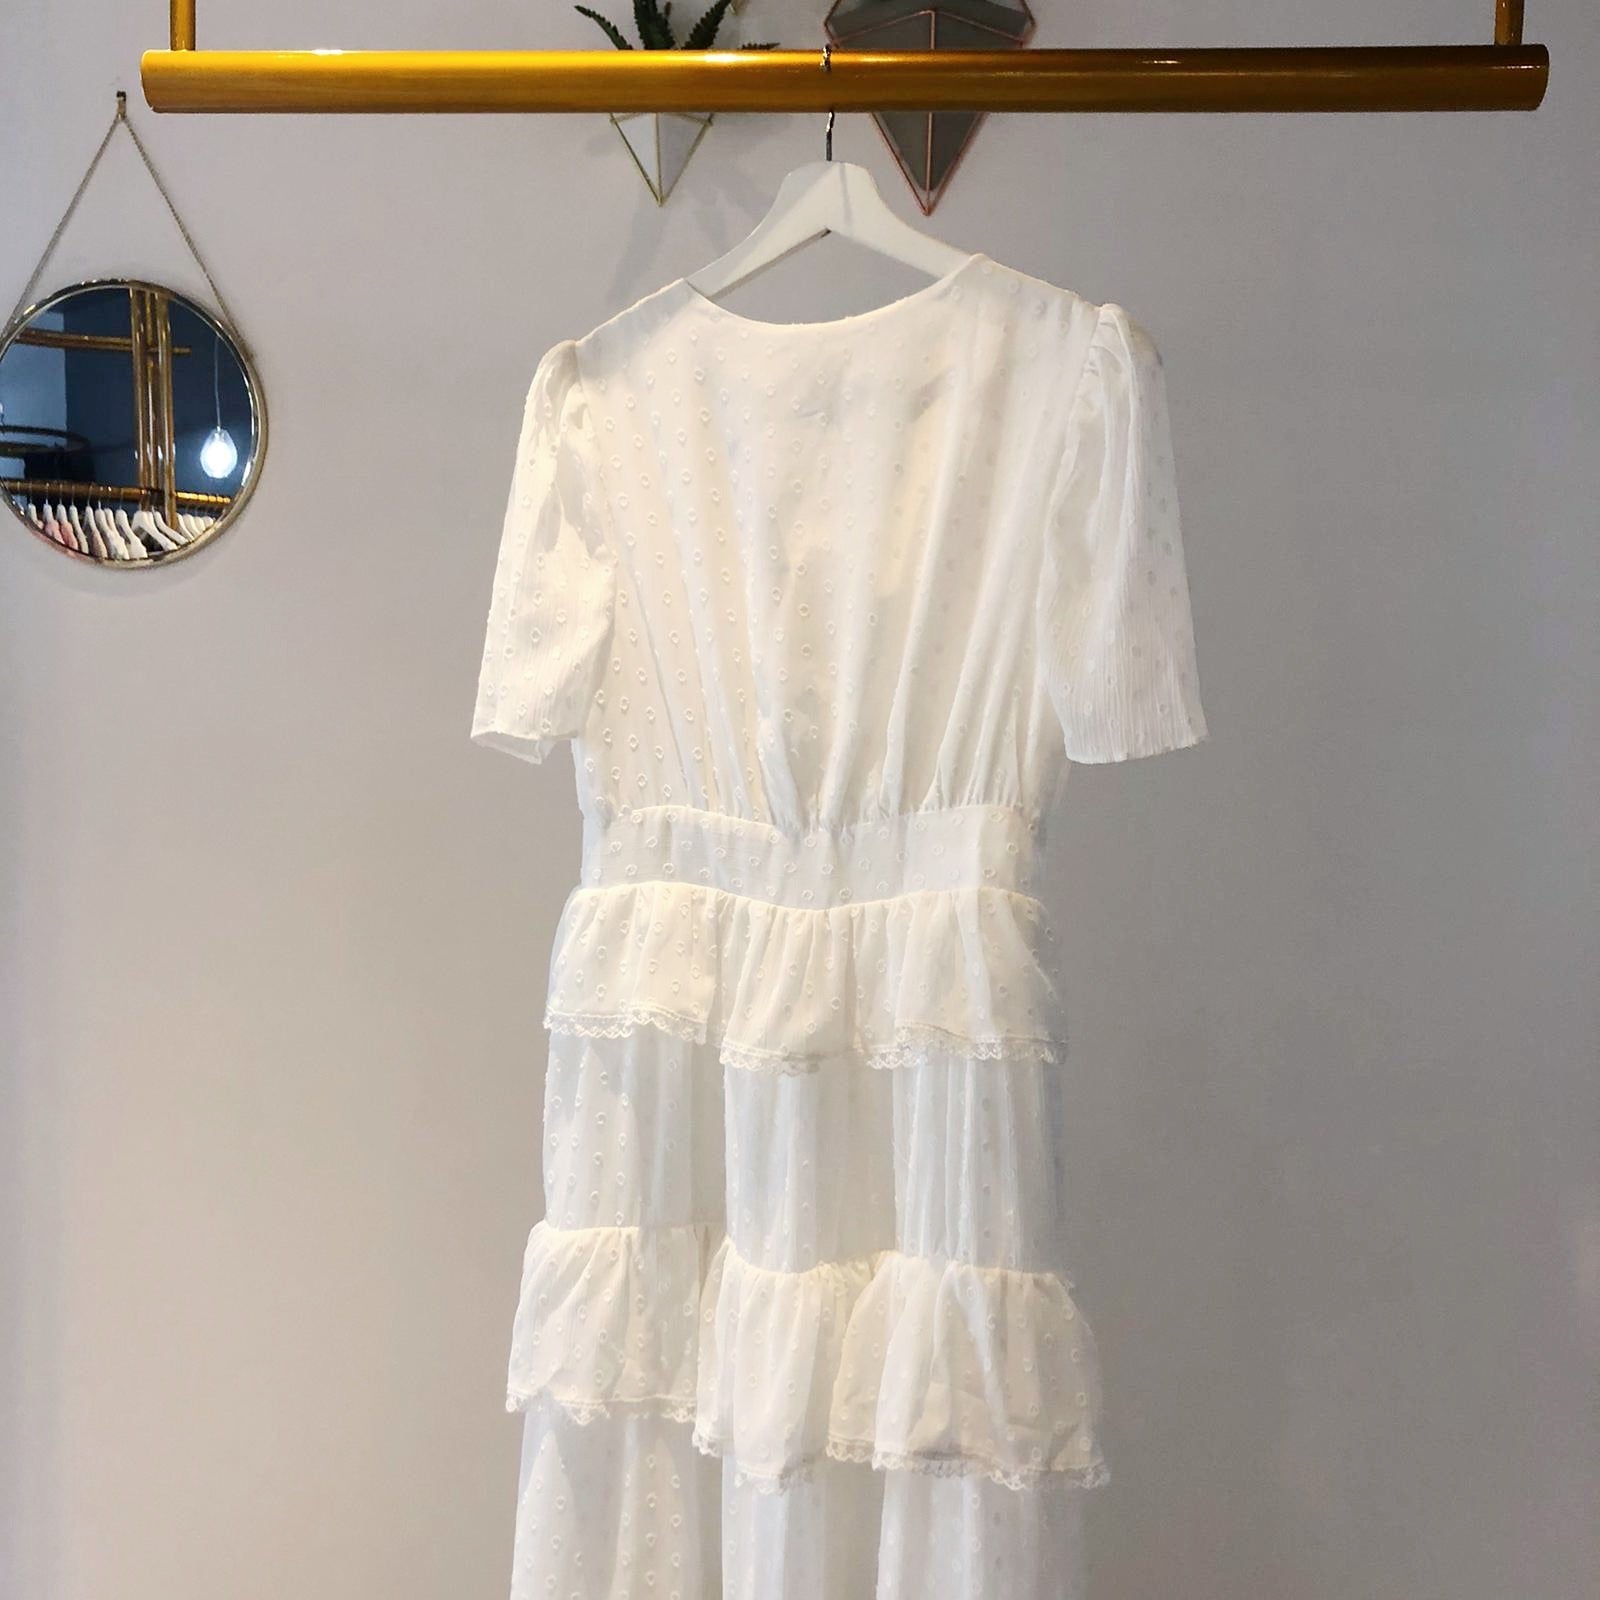 UNIKONCEPT Lifestyle boutique: The image shows the Hamptons White Dress by Free the Roses. This white, ankle length button down dress is extremely elegant with a v-neck and relaxed billowing short sleeves. The fabric is made with small white dots on the white base to add some dimension. The long skirt is tiered and ruffled with a lattice lace detailing as a trim on each layer. 